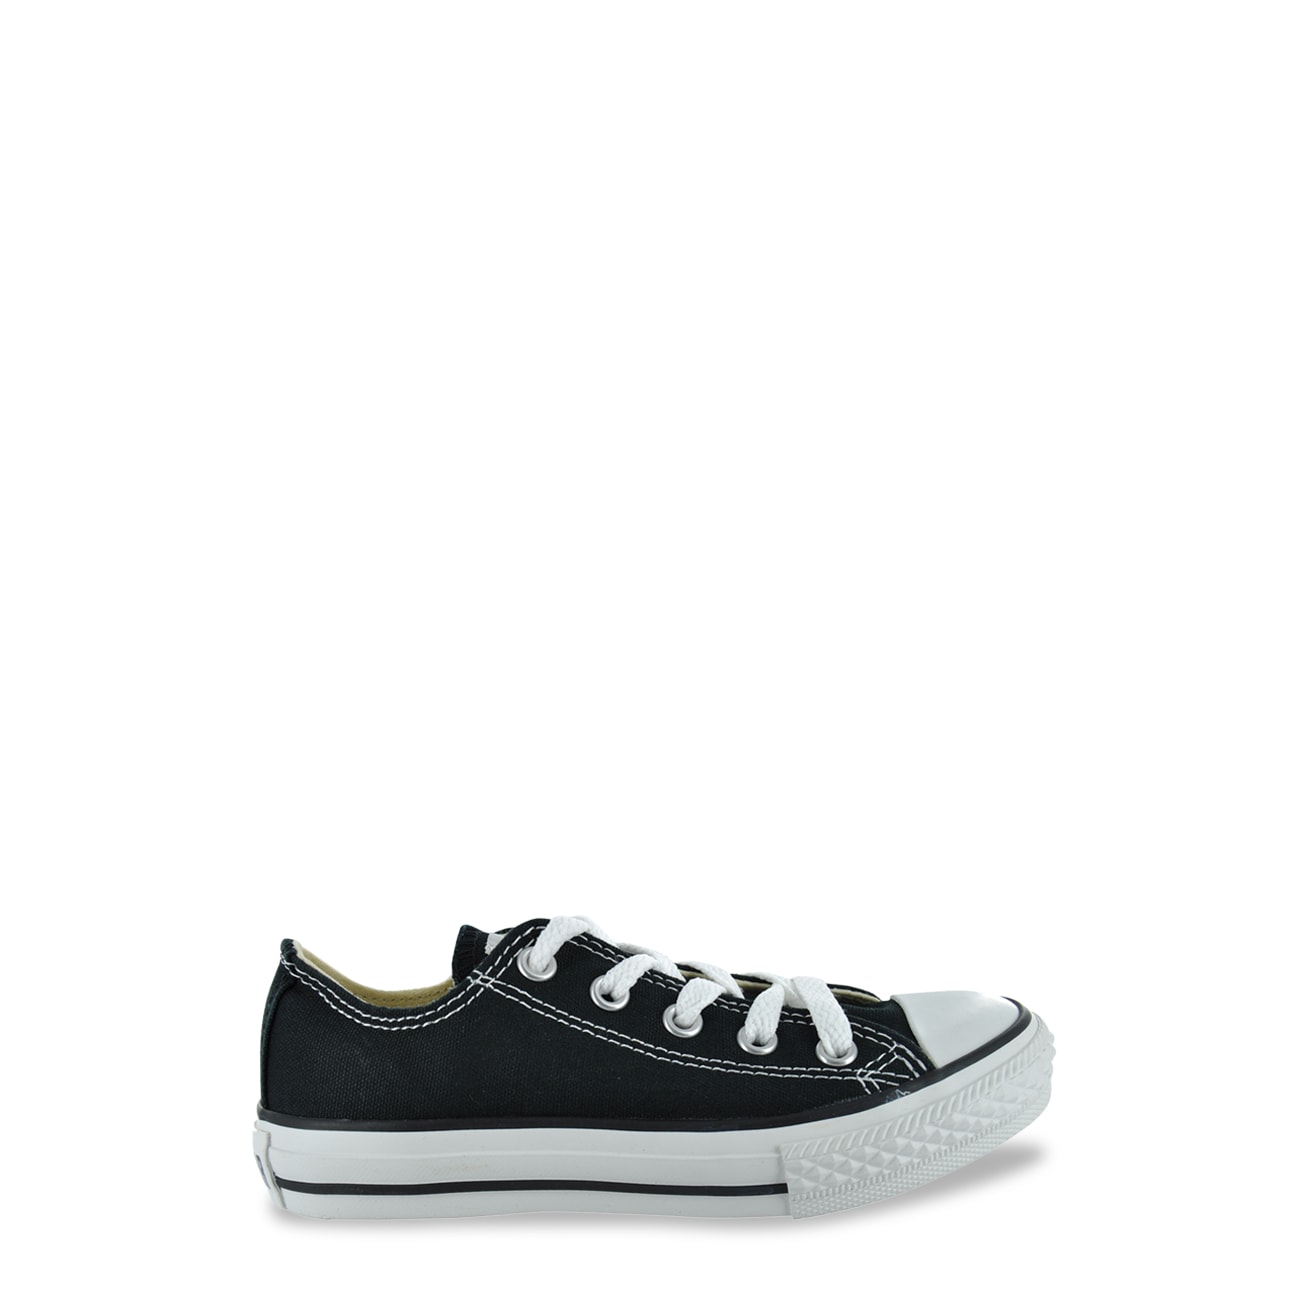 Converse Youth Boy's Chuck Taylor Low Oxford | The Shoe Company